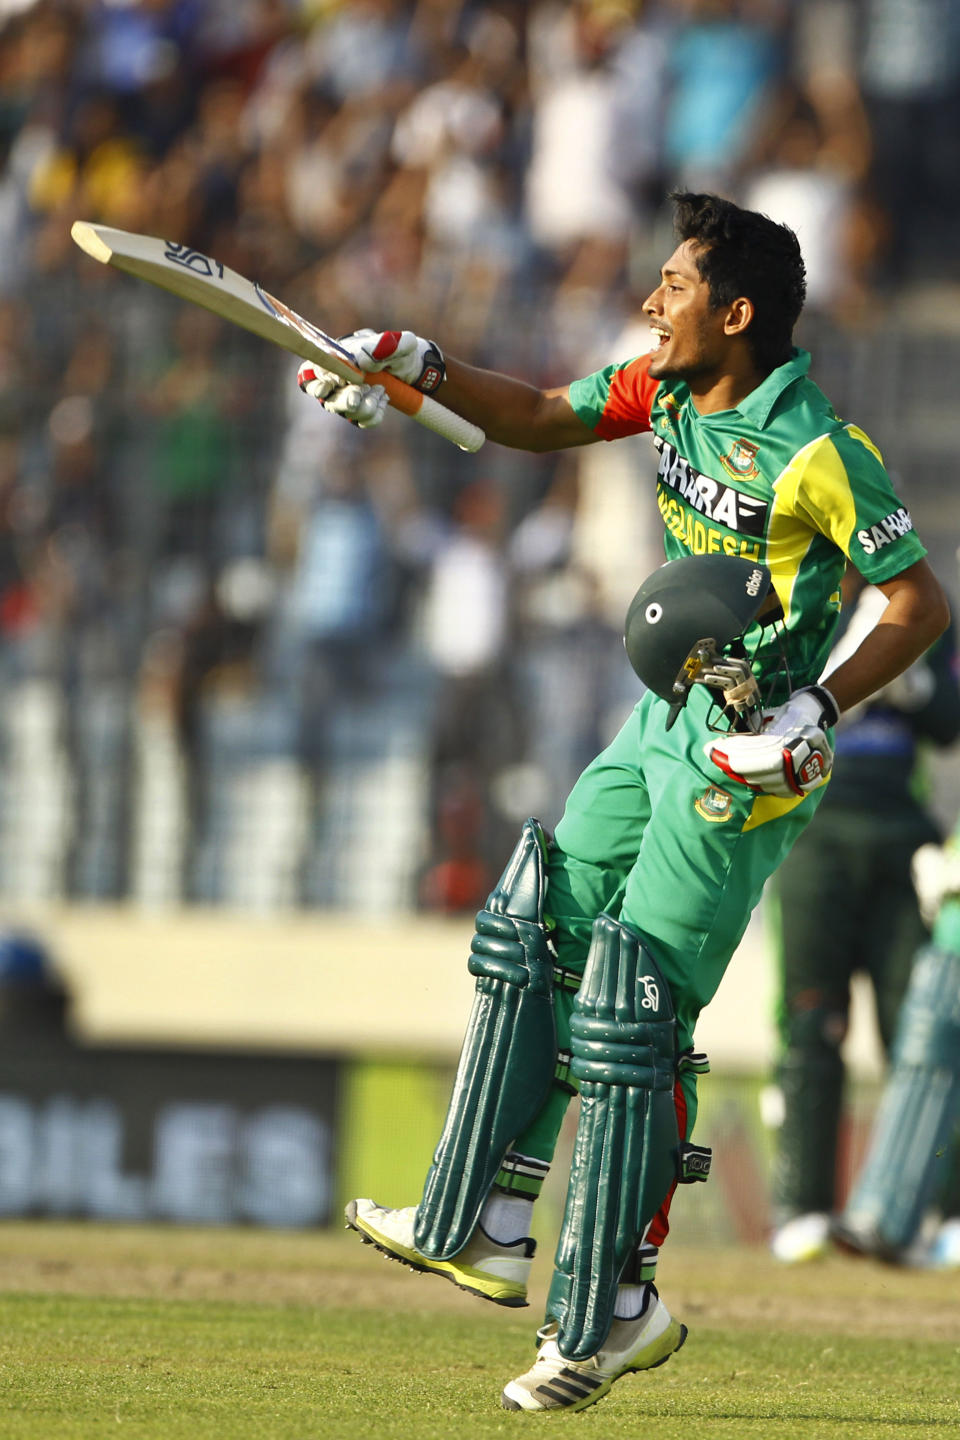 Bangladesh’s Anamul Haque celebrates after scoring a century during their match against Pakistan in the Asia Cup one-day international cricket tournament in Dhaka, Bangladesh, Tuesday, March 4, 2014. (AP Photo/A.M. Ahad)